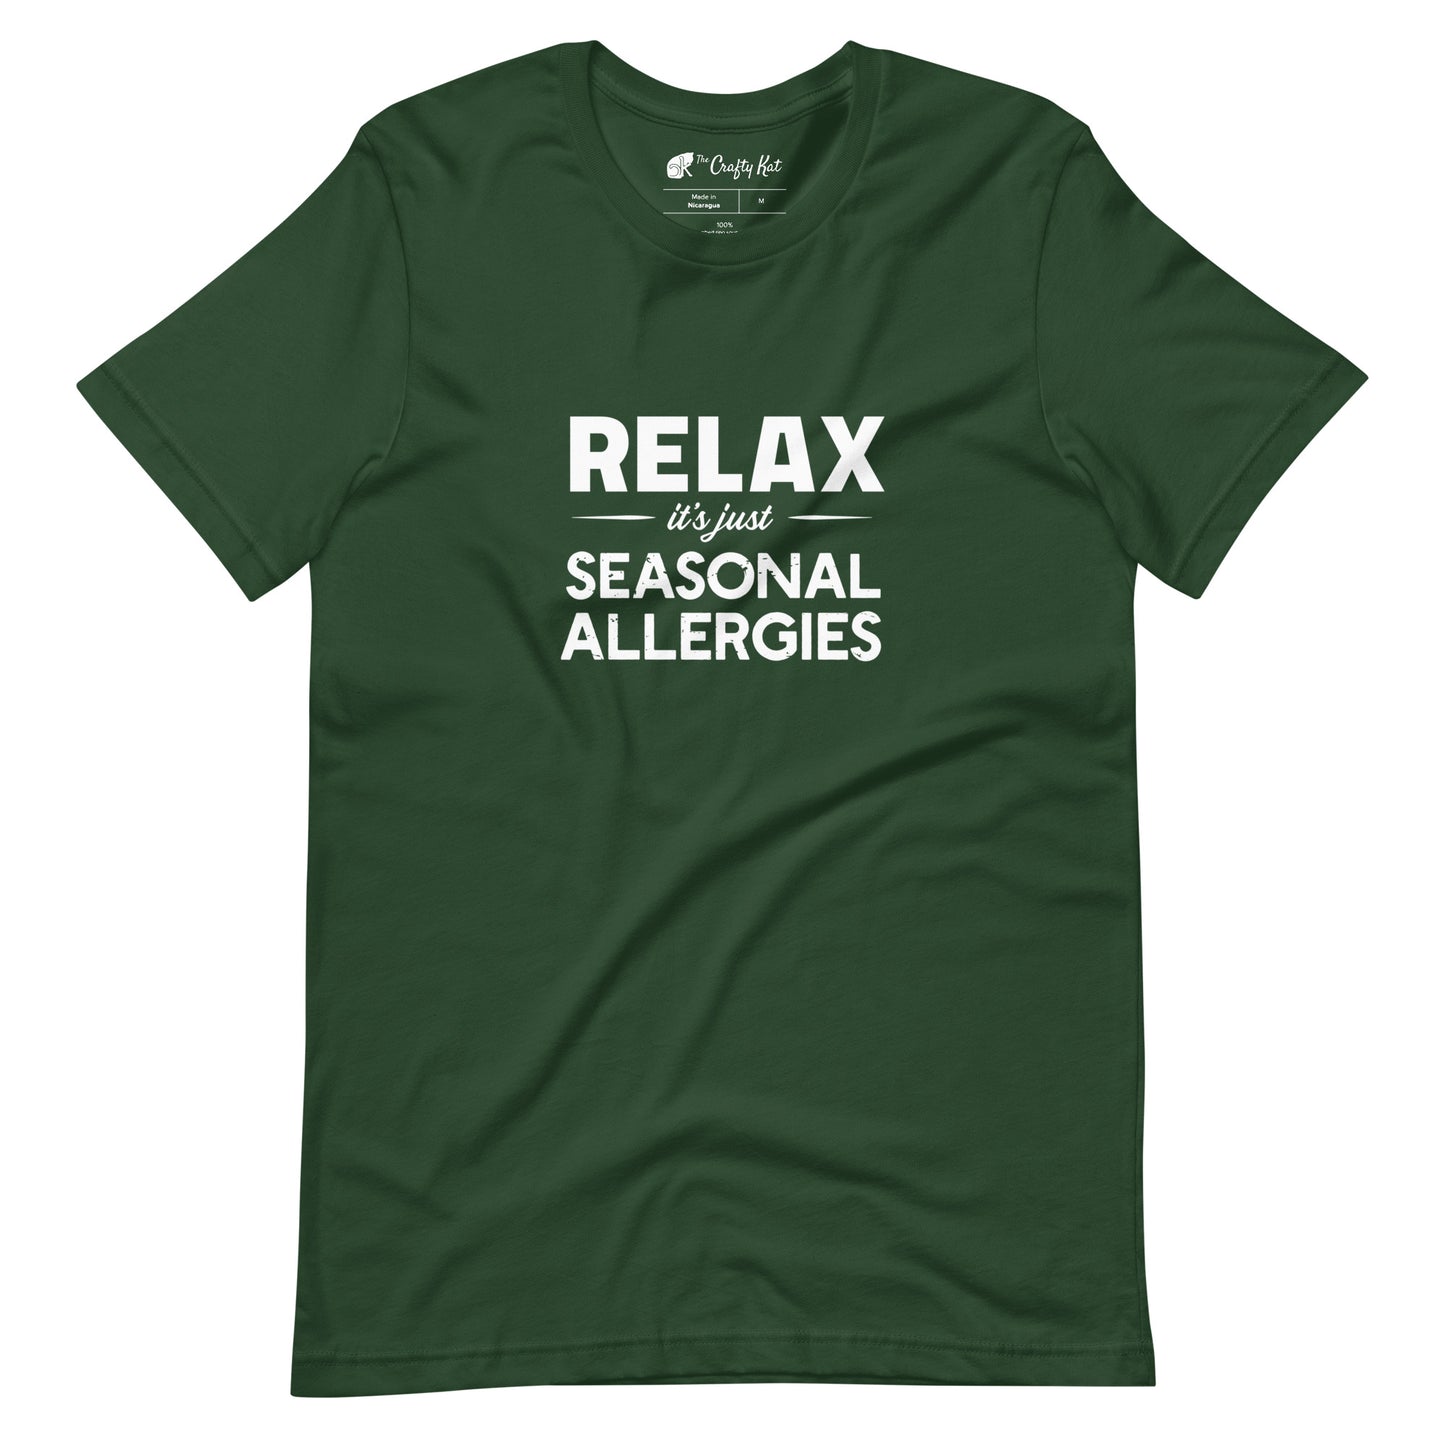 Forest green t-shirt with white graphic: "RELAX it's just SEASONAL ALLERGIES"